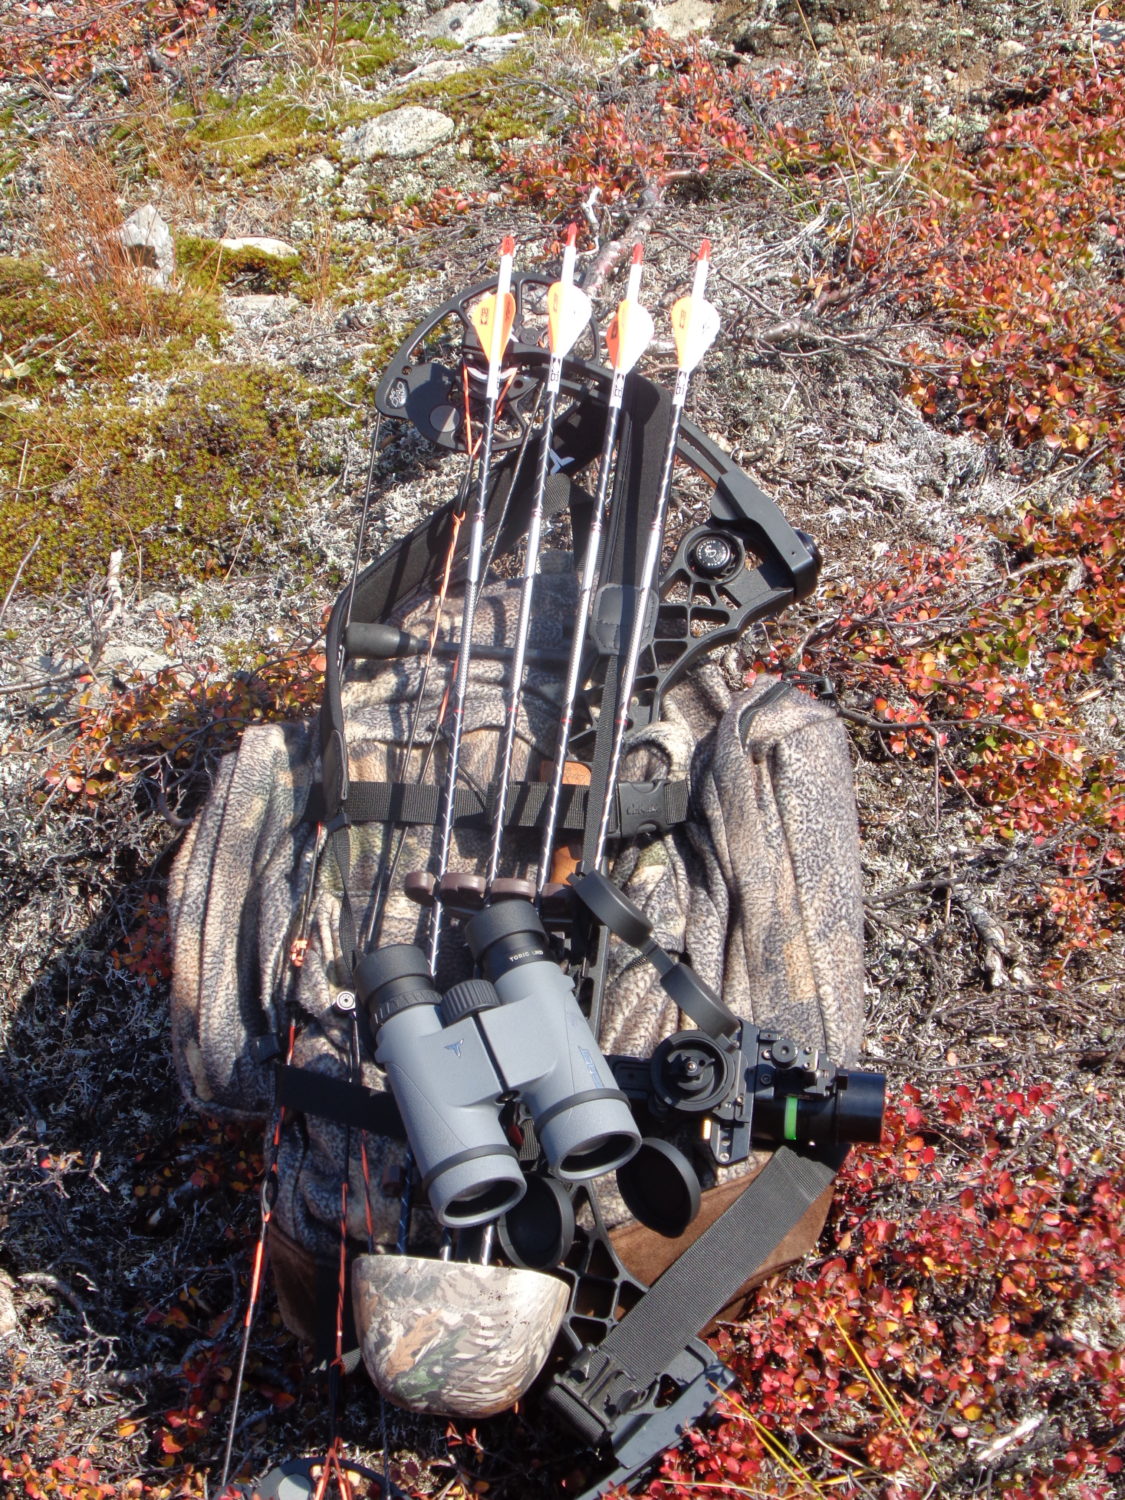 Wasp gear for Greenland hunt